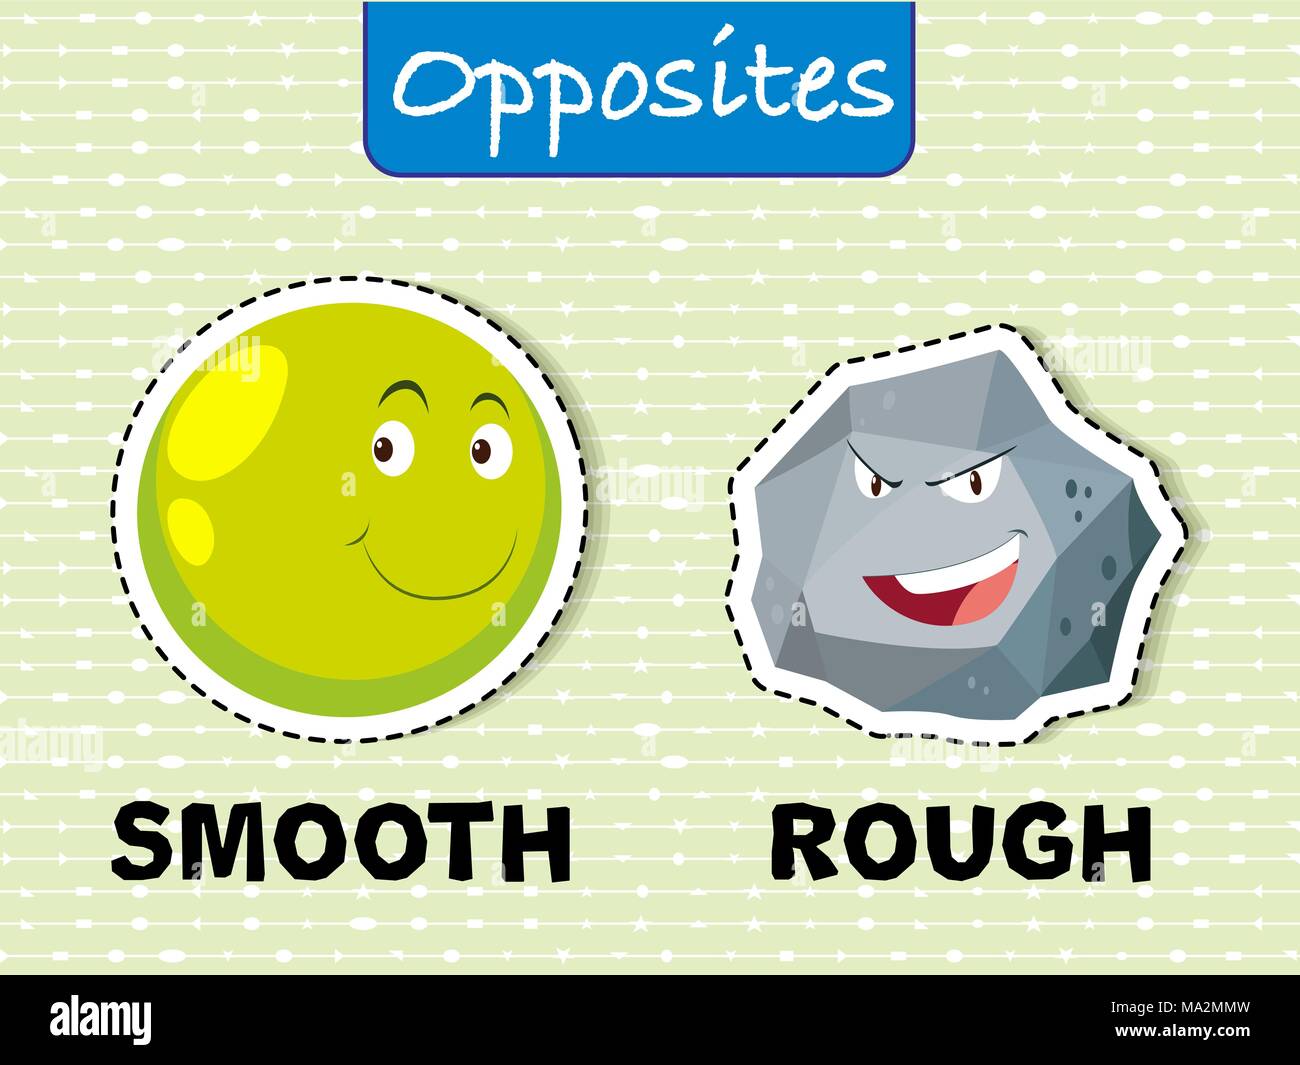 Opposite words for smooth and rough illustration Stock Vector